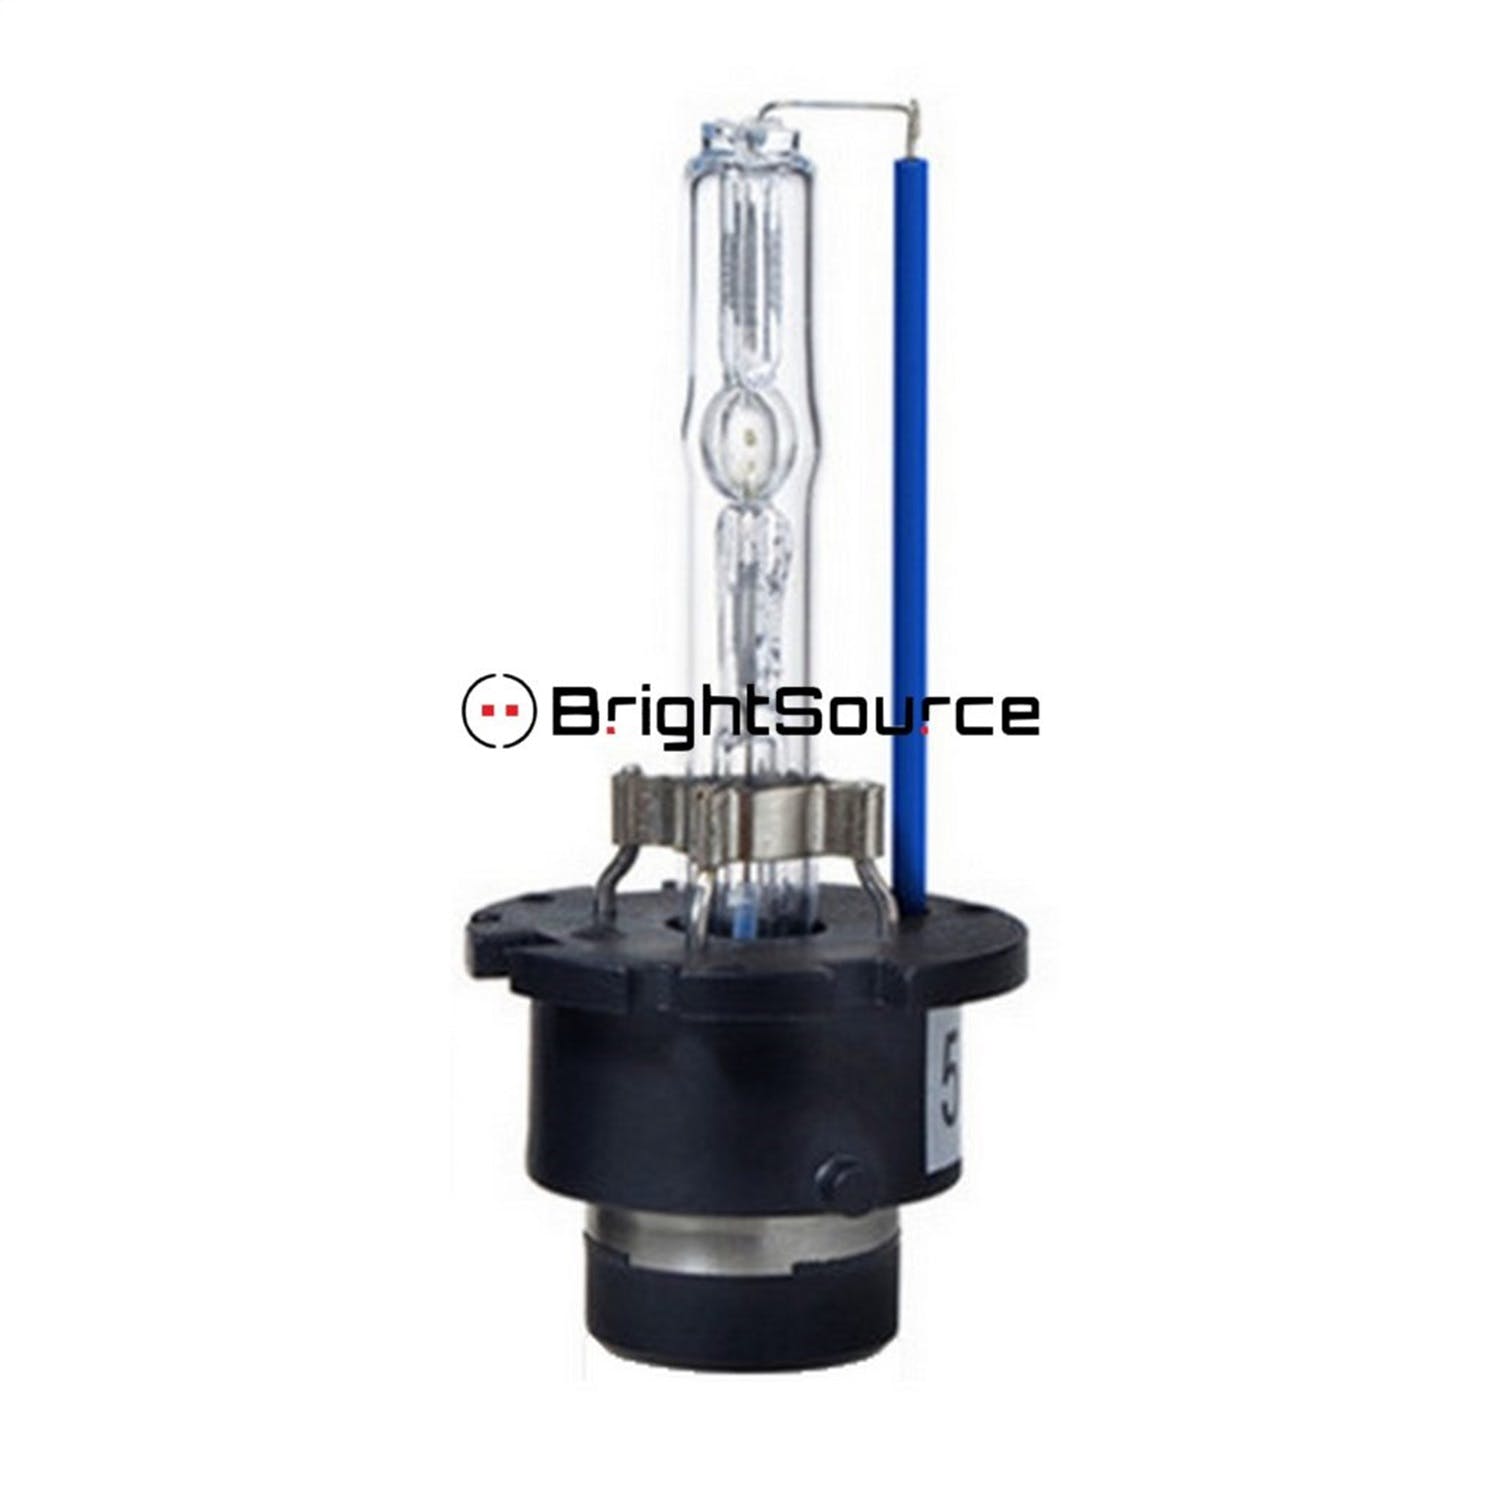 BrightSource D2S43 Single D2 OE Replacement/Upgrade Bulb 4300K